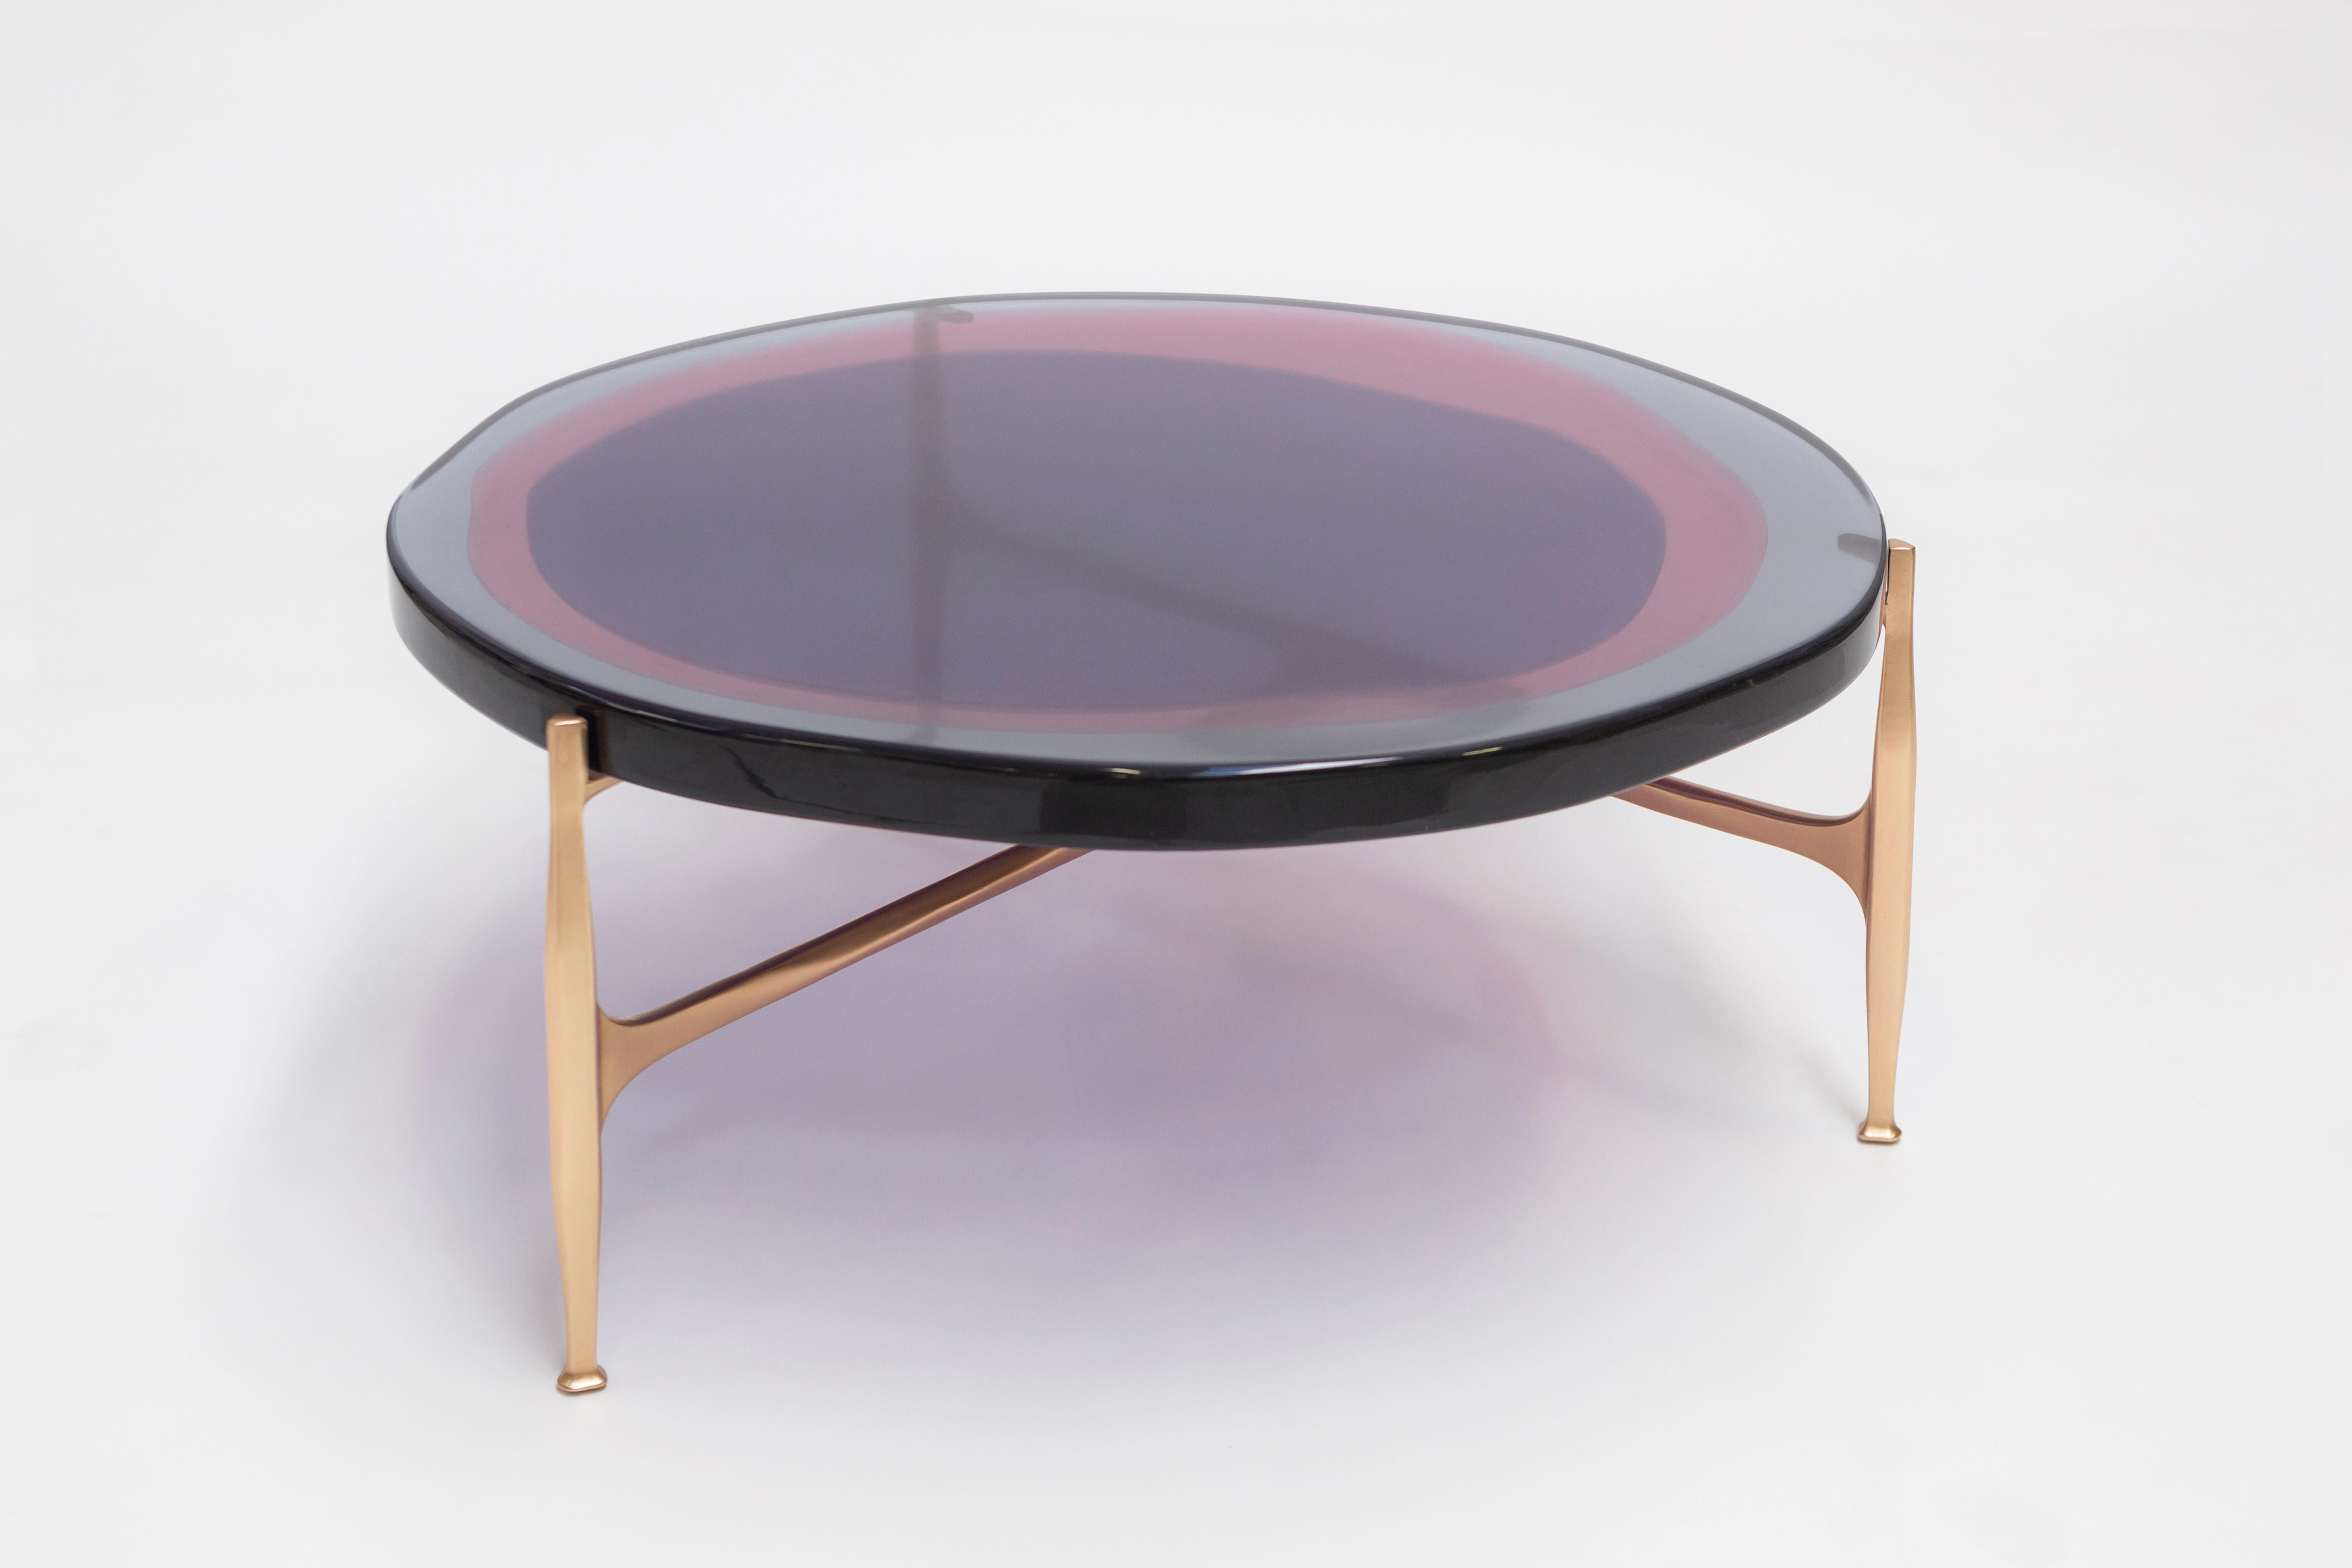 Agatha Coffee Table by Draga & Aurel
Dimensions: W 90 x D 90 x H 36
 Top Ø 90 cm
Materials: Resin and bronze

The Agatha coffee tables are featured by irregular circular tops of transparent and
colorful resin sit on a bronze frame with a staggered